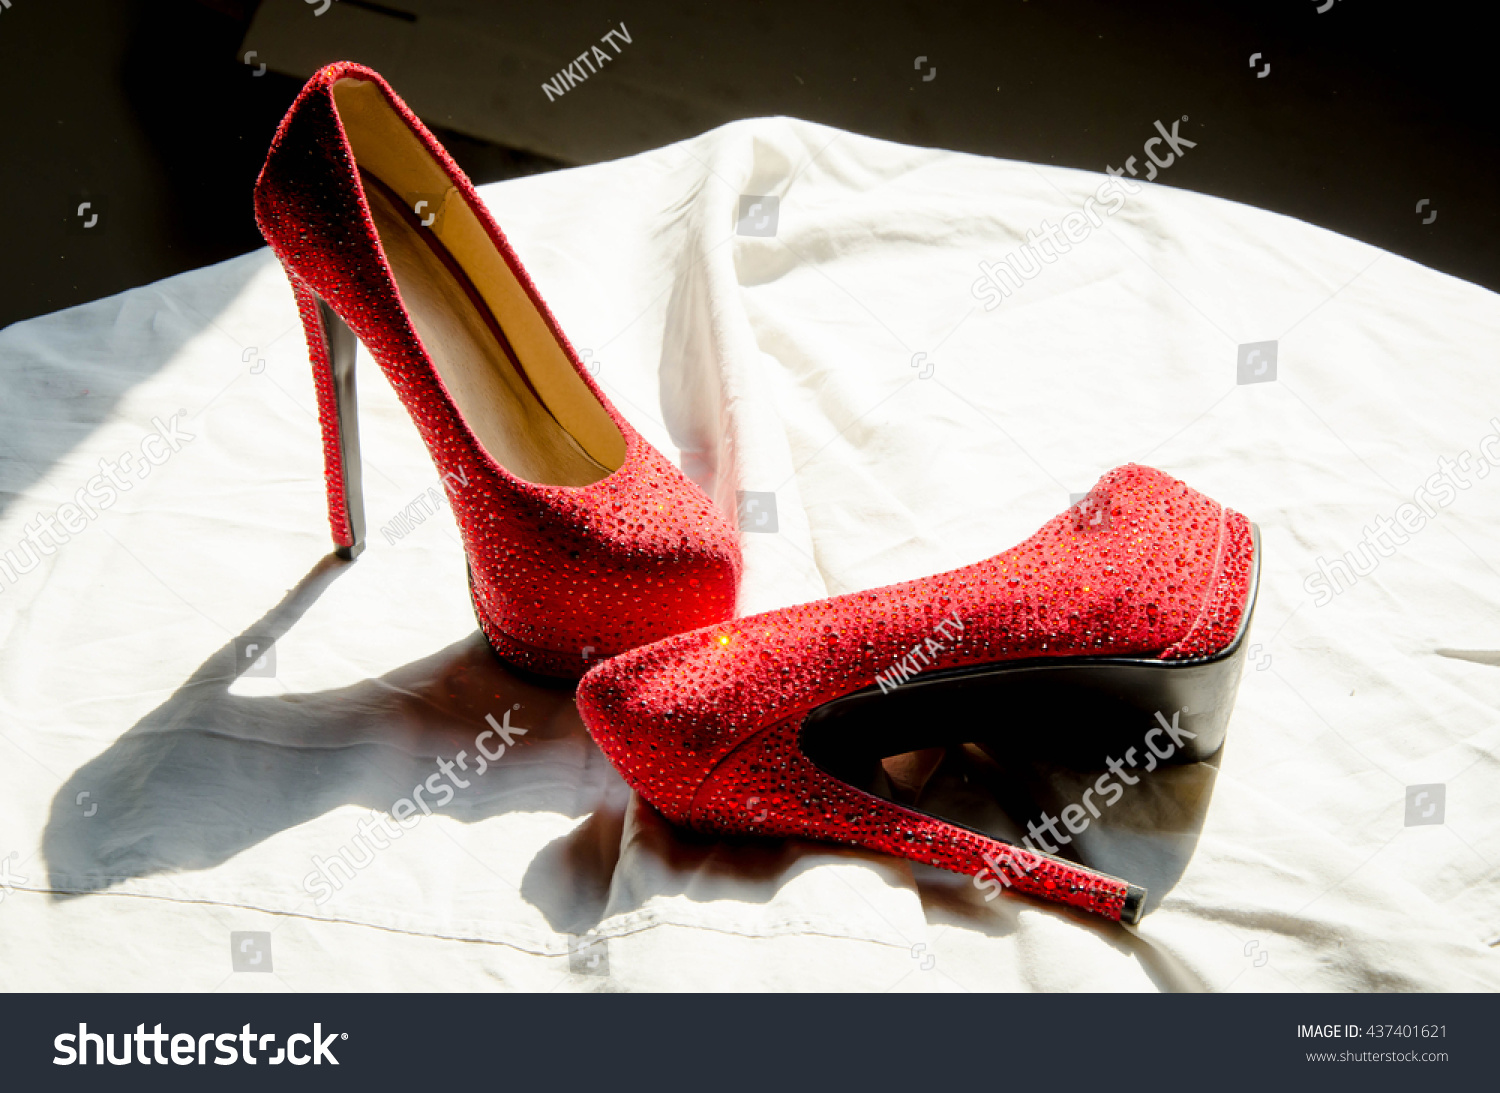 Red woman shoes #437401621